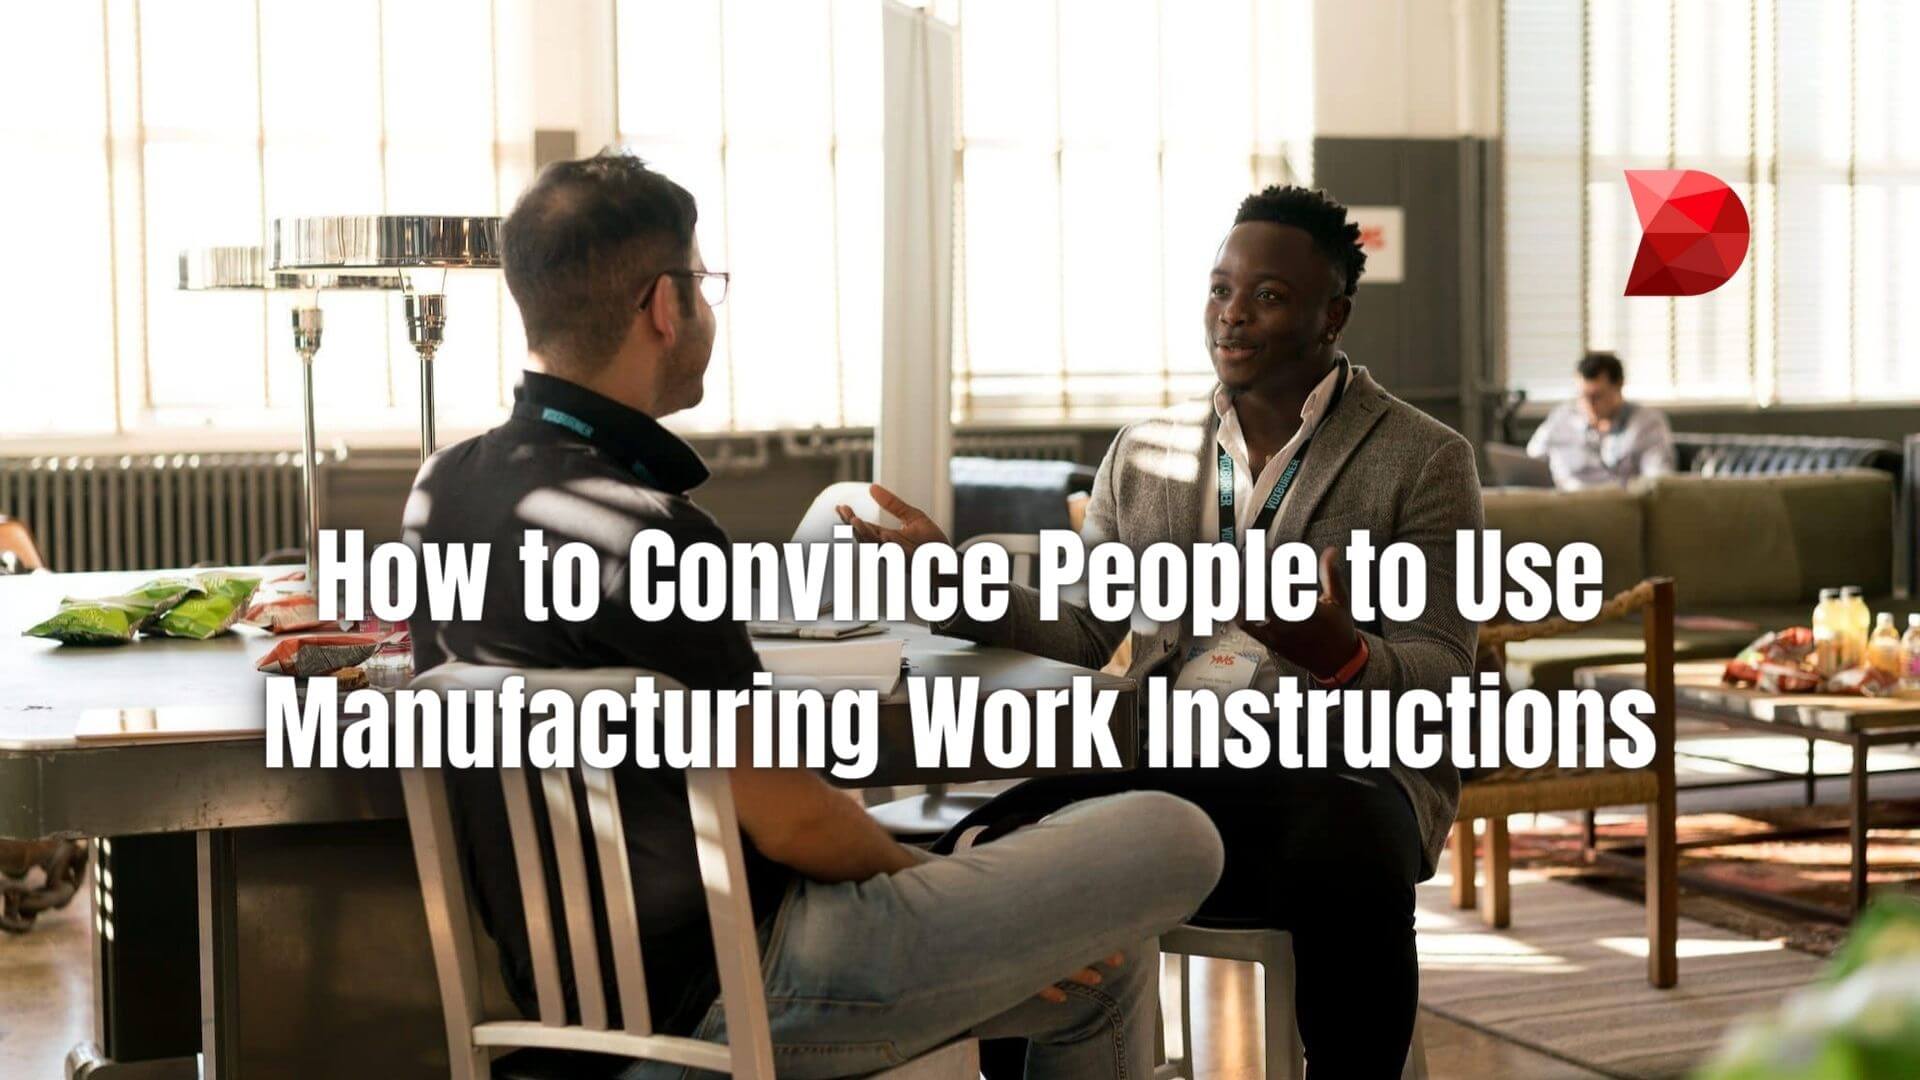 A manufacturing work instruction is a document that details how a process should be performed. Here's how to convince people to use it.